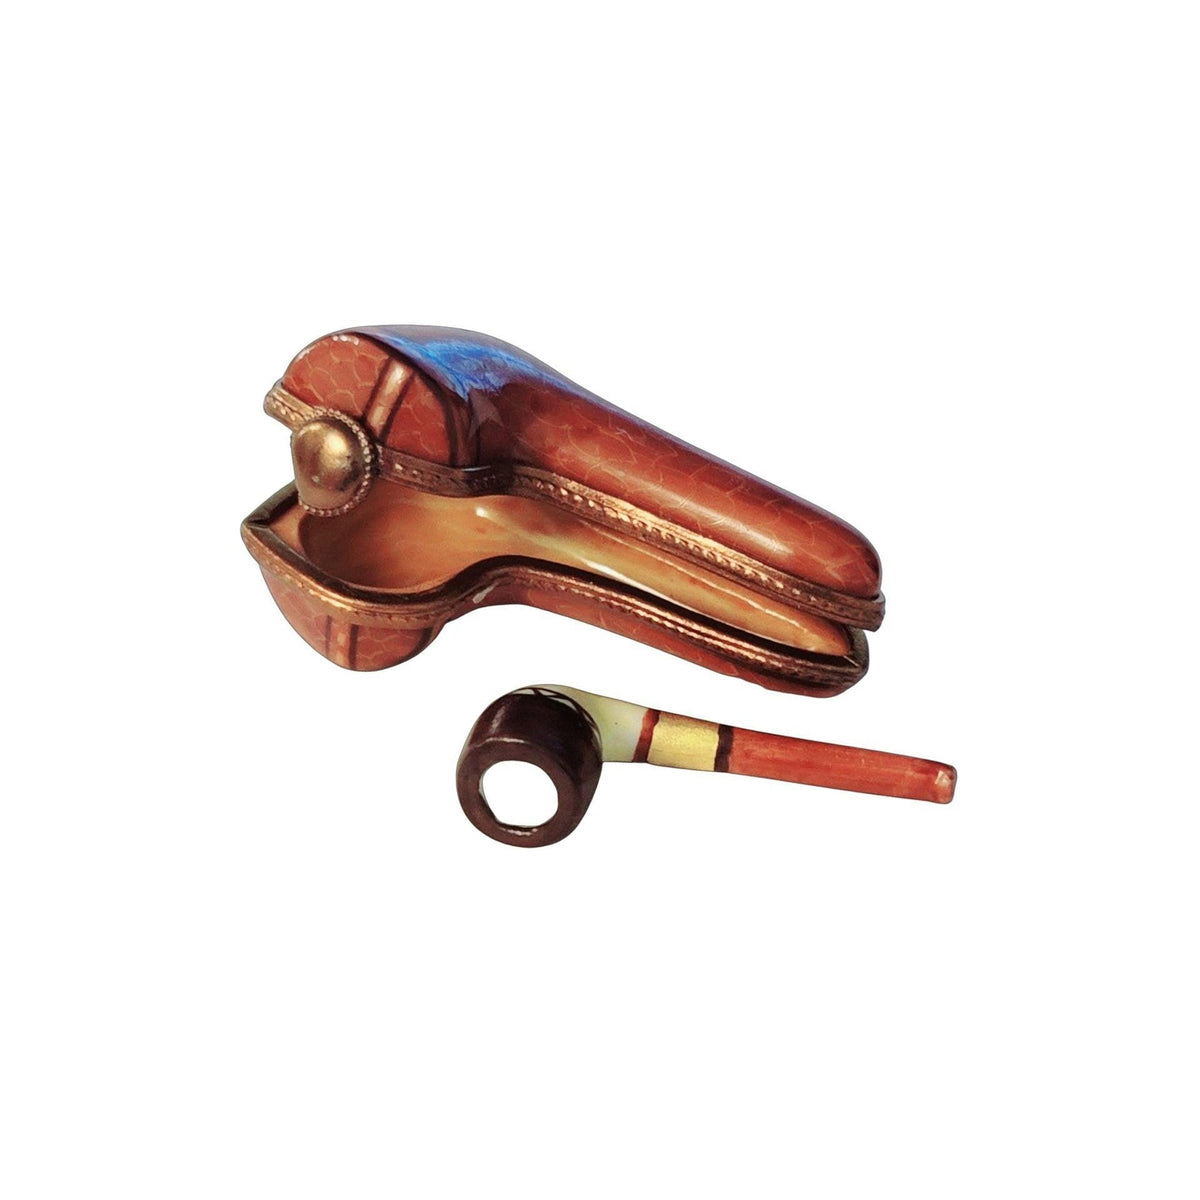 Smoking Pipe Tobacco Limoges Box Figurine - Limoges Box Boutique